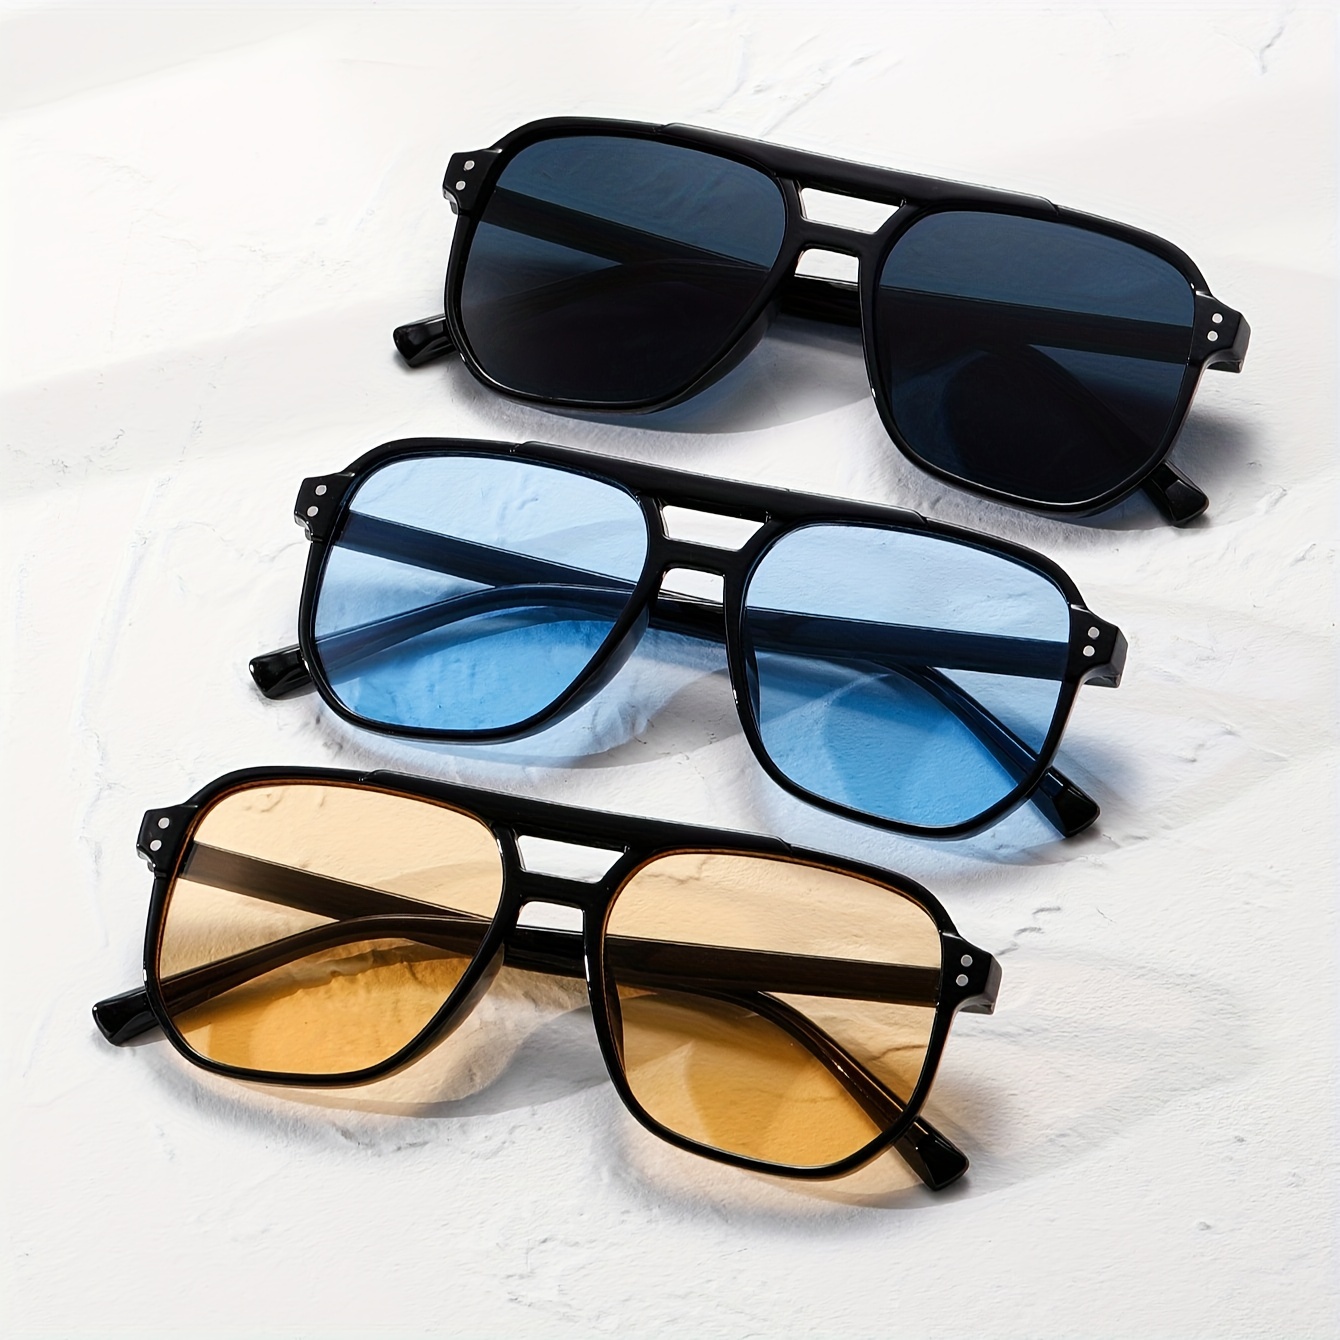 

3pairs Fashionable Double-beam Glasses With Retro Square Frame, Glasses To Protect Against Ultraviolet Rays